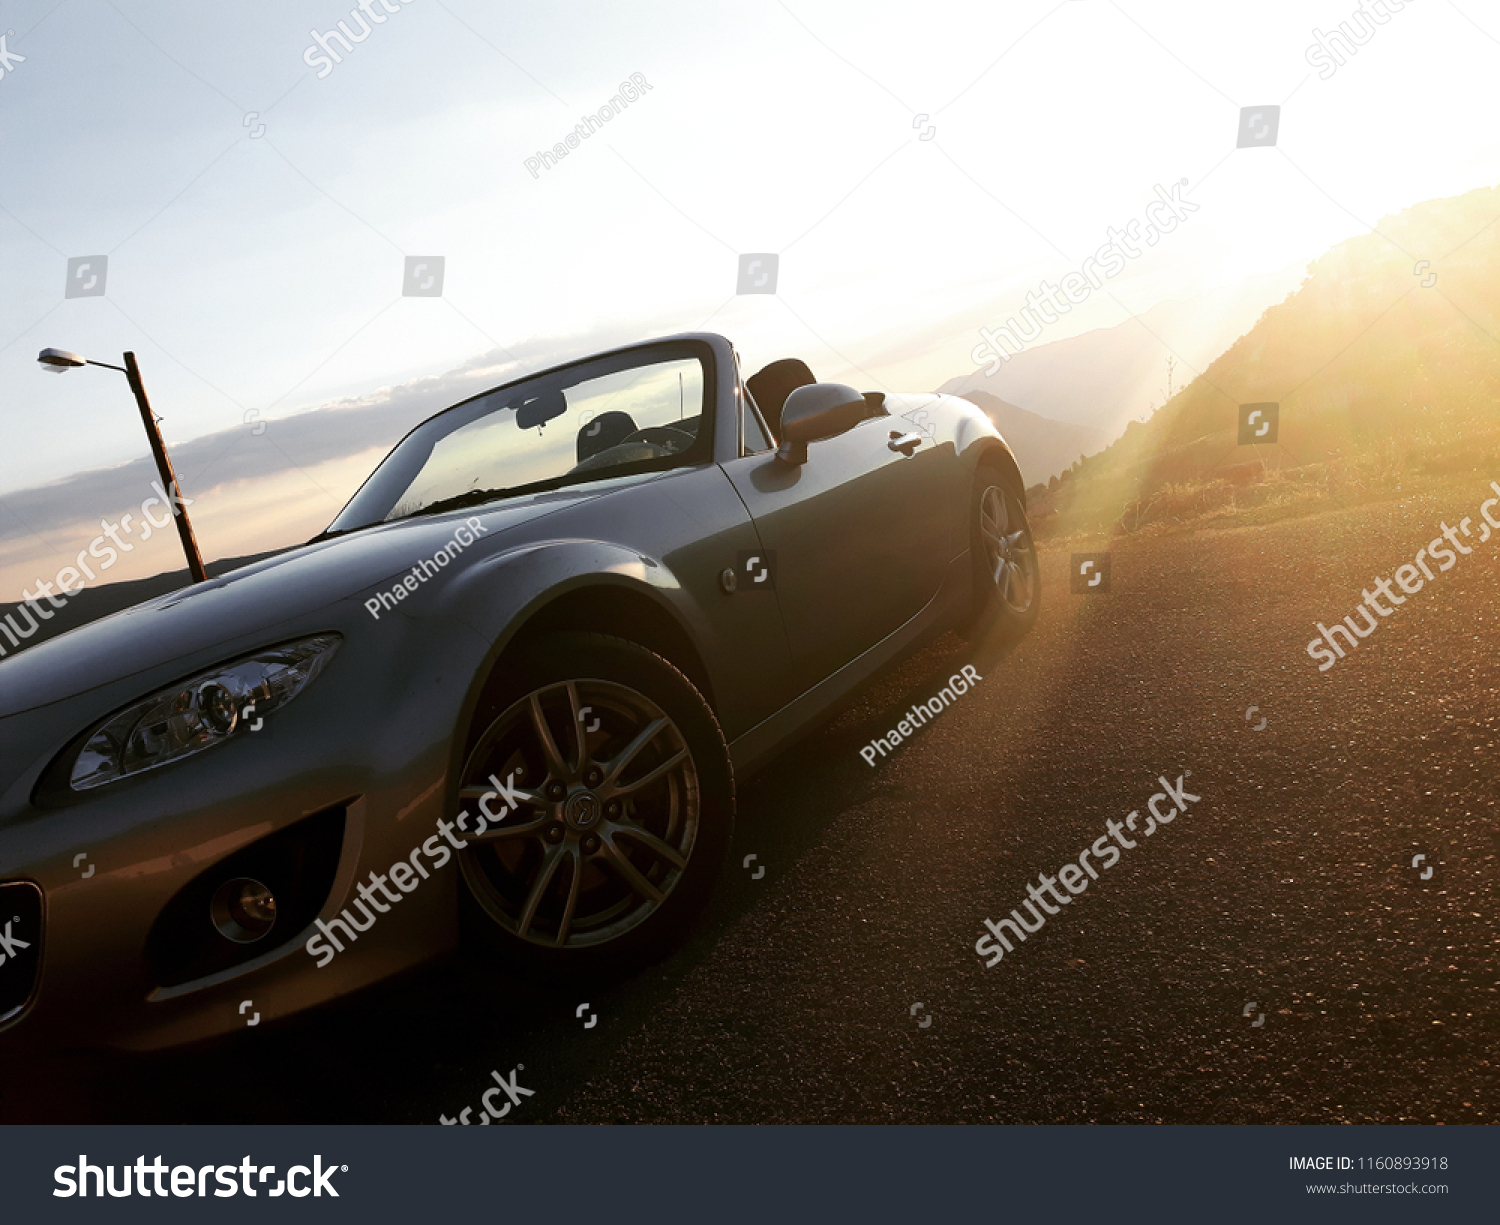 Sunset front view of silver gray convertible car, mountain valley in background #1160893918